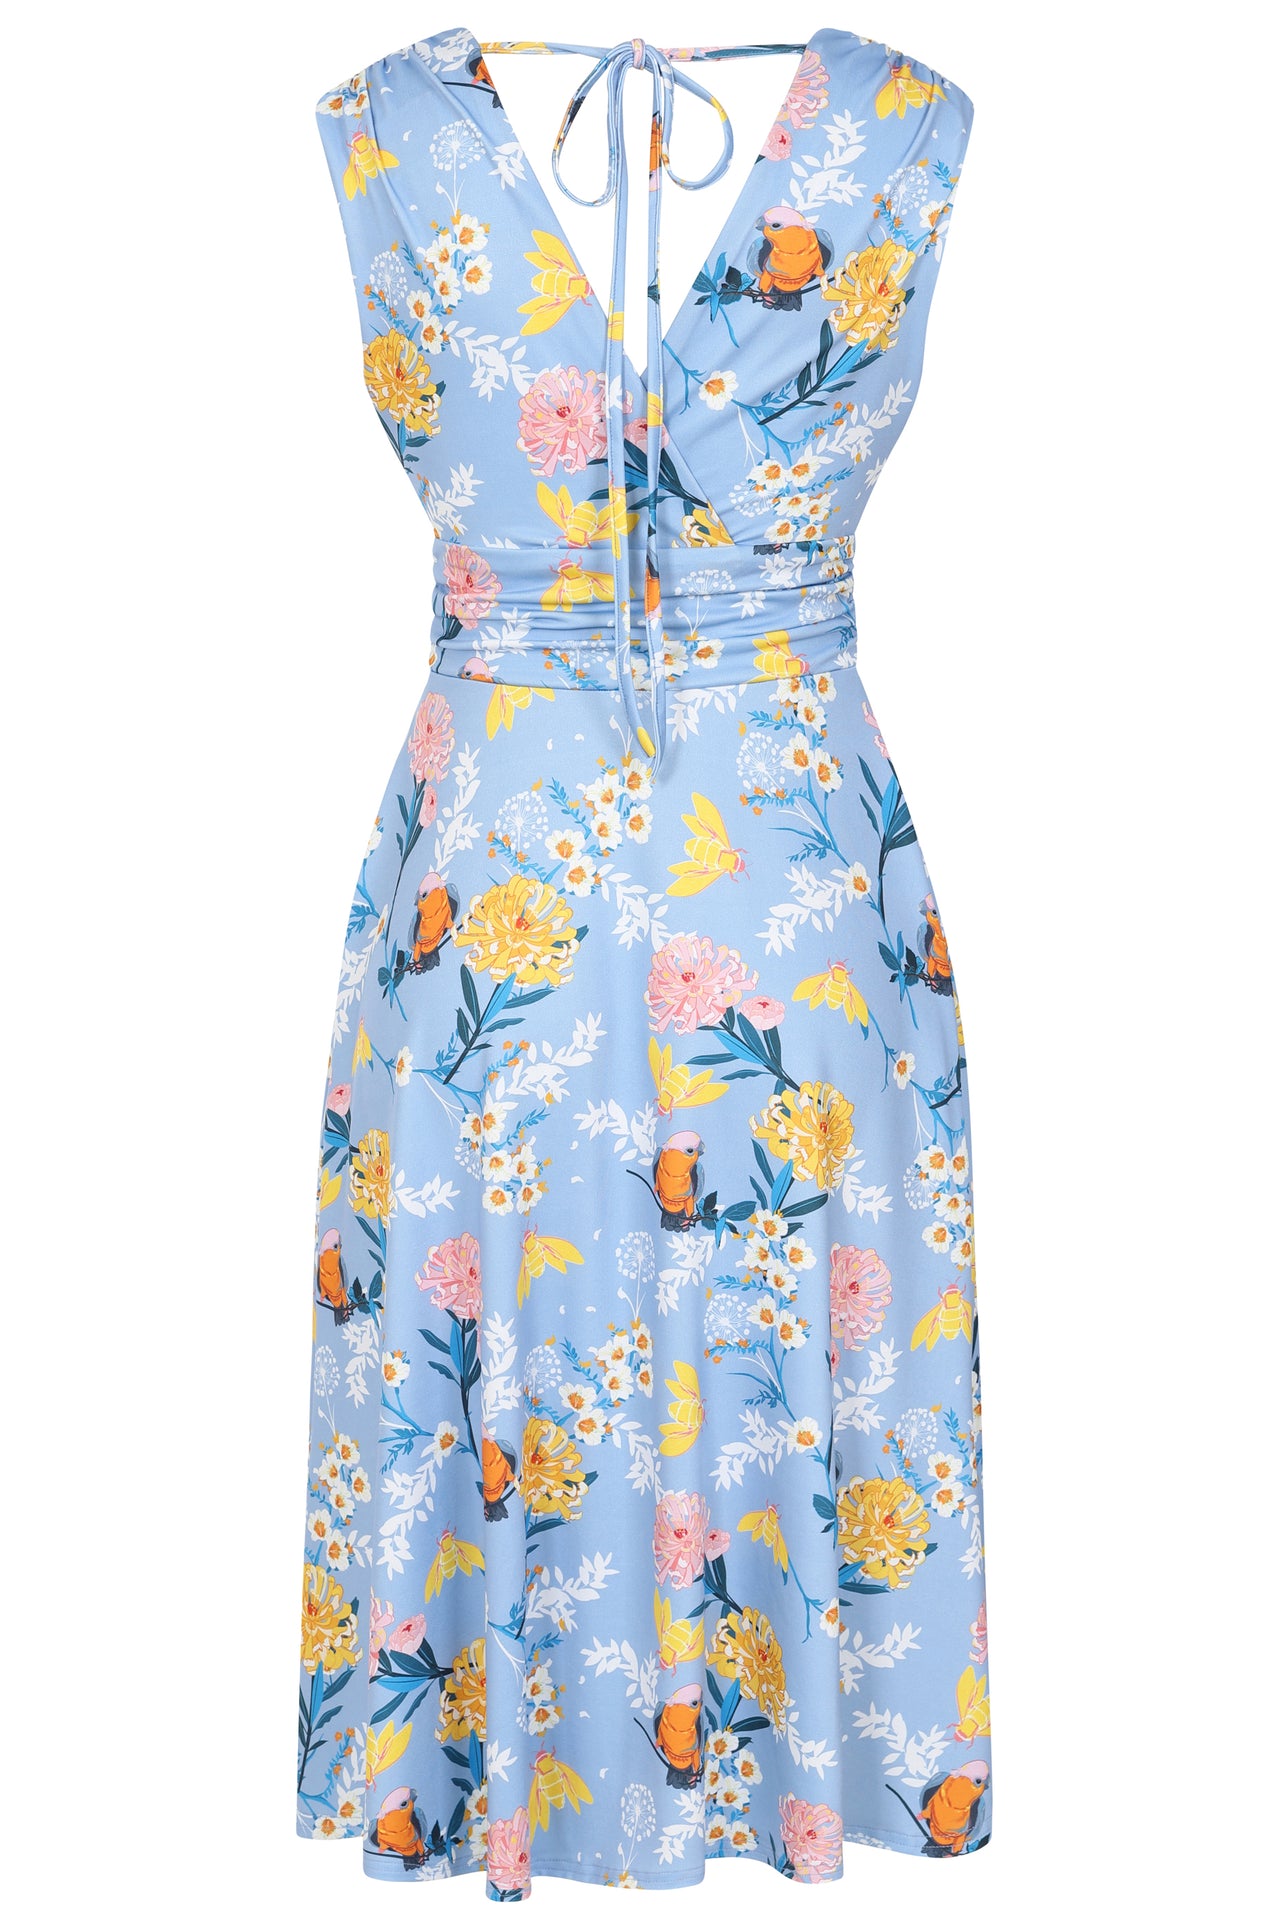 Arabella Dress - Birds and the Bees